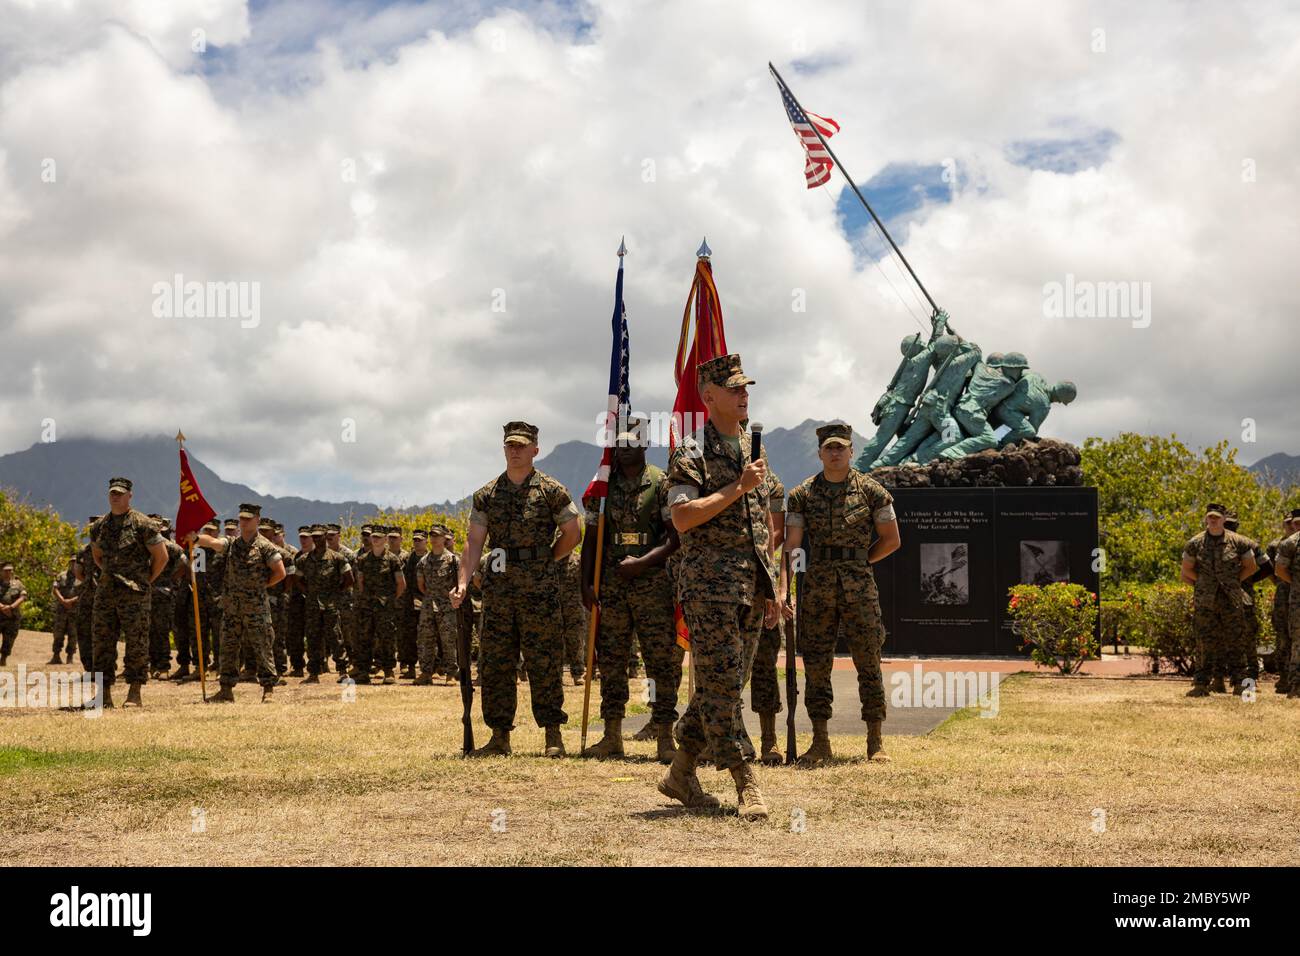 U.S. Marine Corps Col. Timothy S. Brady Jr, commanding officer, 3d Marine Littoral Regiment, gives his remarks during a change of command ceremony at Marine Corps Base Hawaii, June 23, 2022. The ceremony is a tradition symbolizing the transfer of authority, responsibility and accountability of the Marines and Sailors. Stock Photo